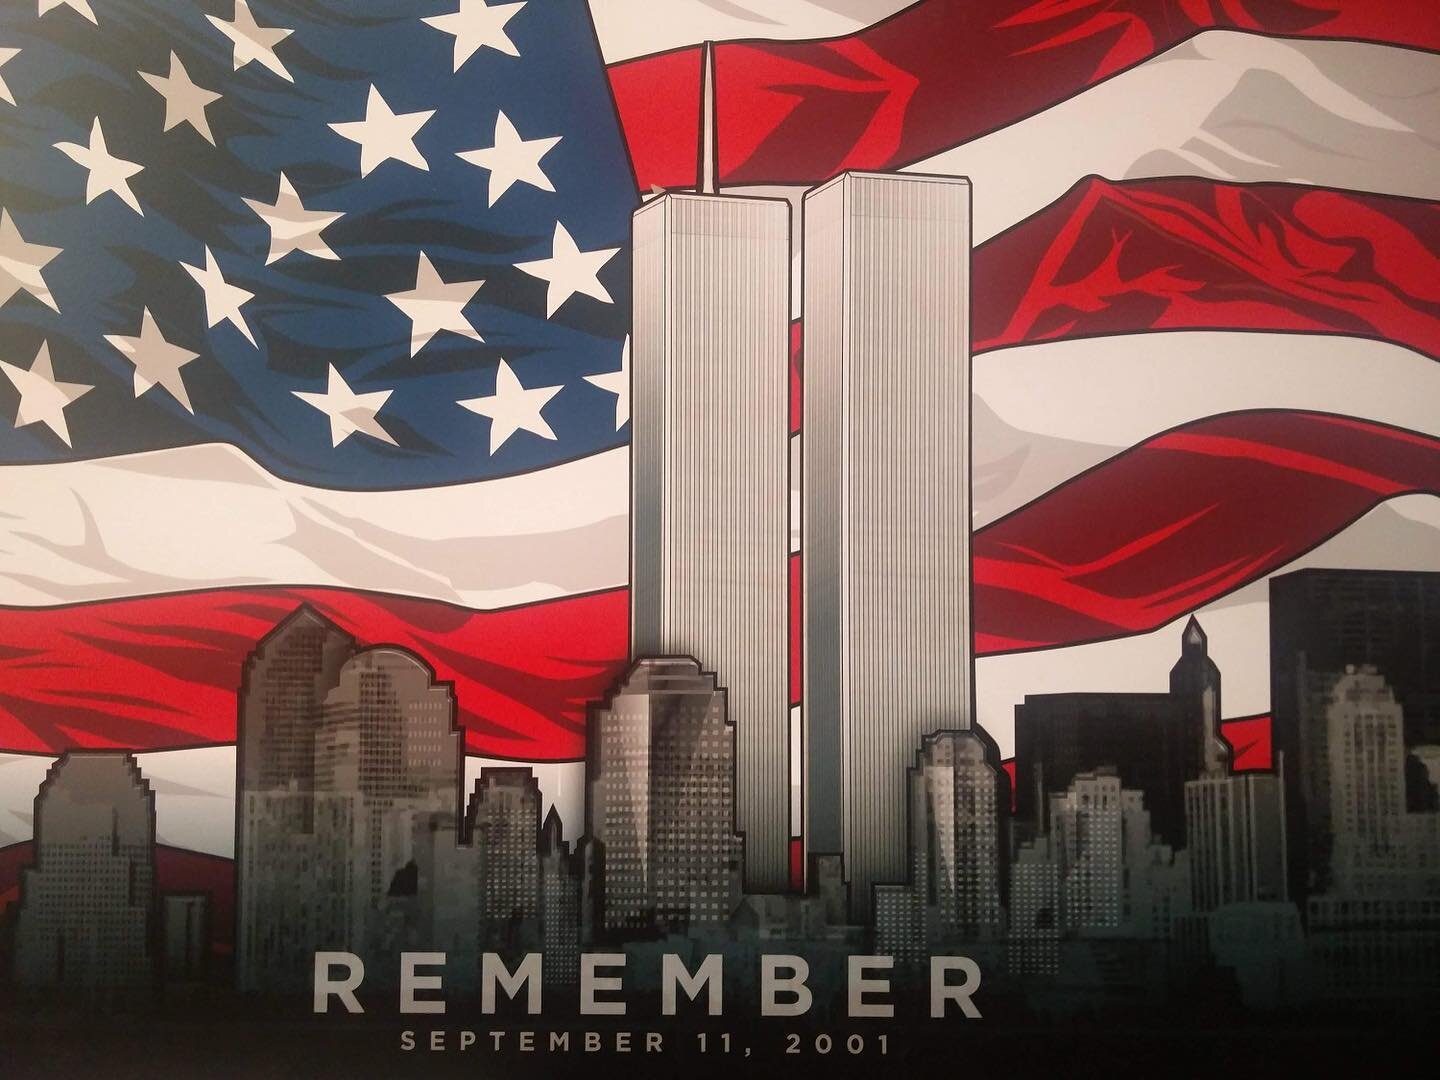 September 11, 2001. Almost 3,000 people lost their lives during the attacks at the Twin Towers, Pentagon and aboard United Airlines Flight 93. Today we remember those people and the sacrifices of those that followed.

#911 #neverforget